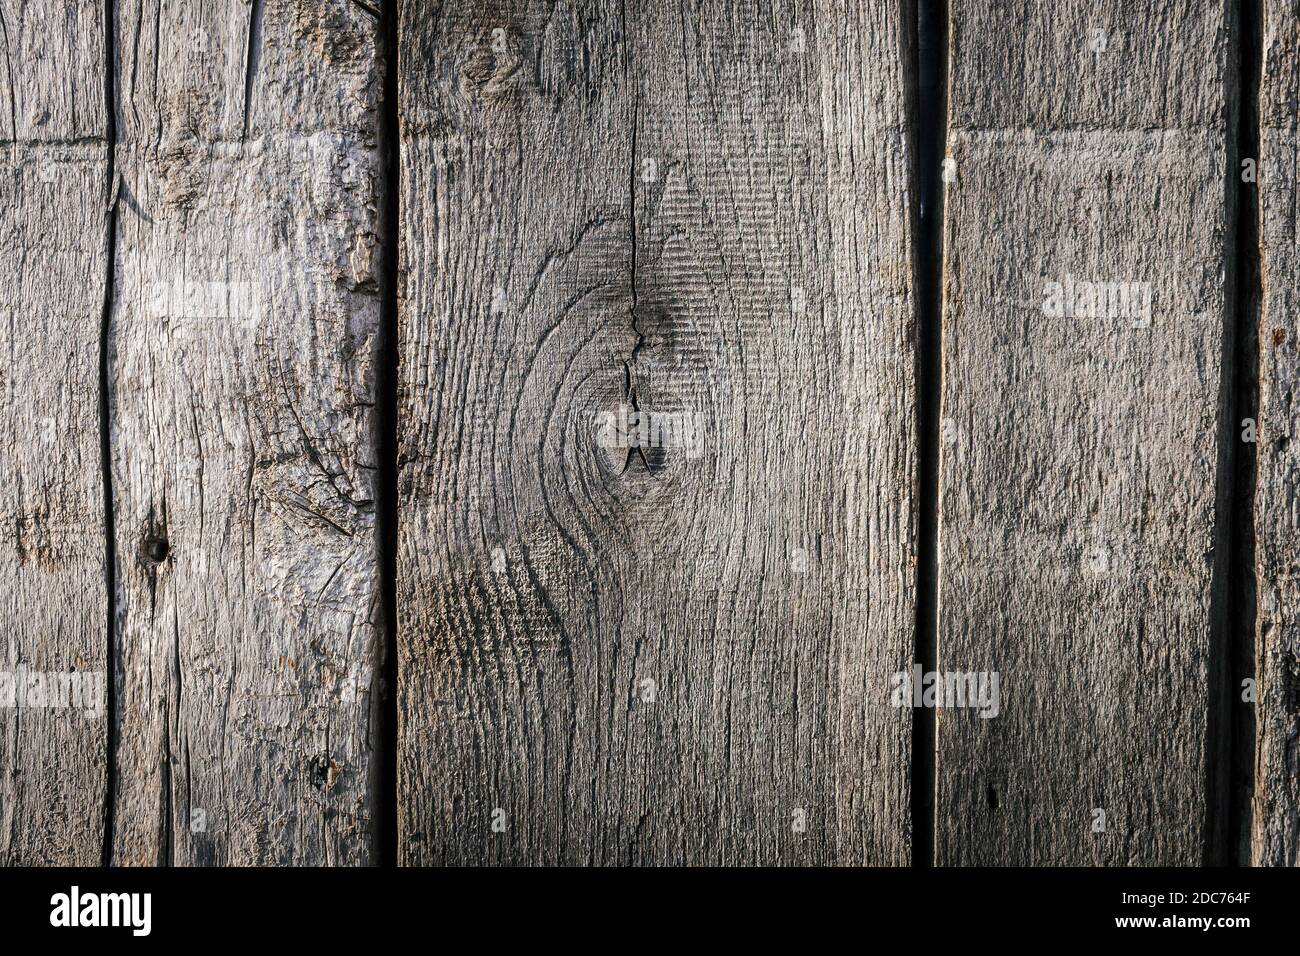 Texture of old wooden planks with lots of cracks, scratches and holes. Close up. Stock Photo